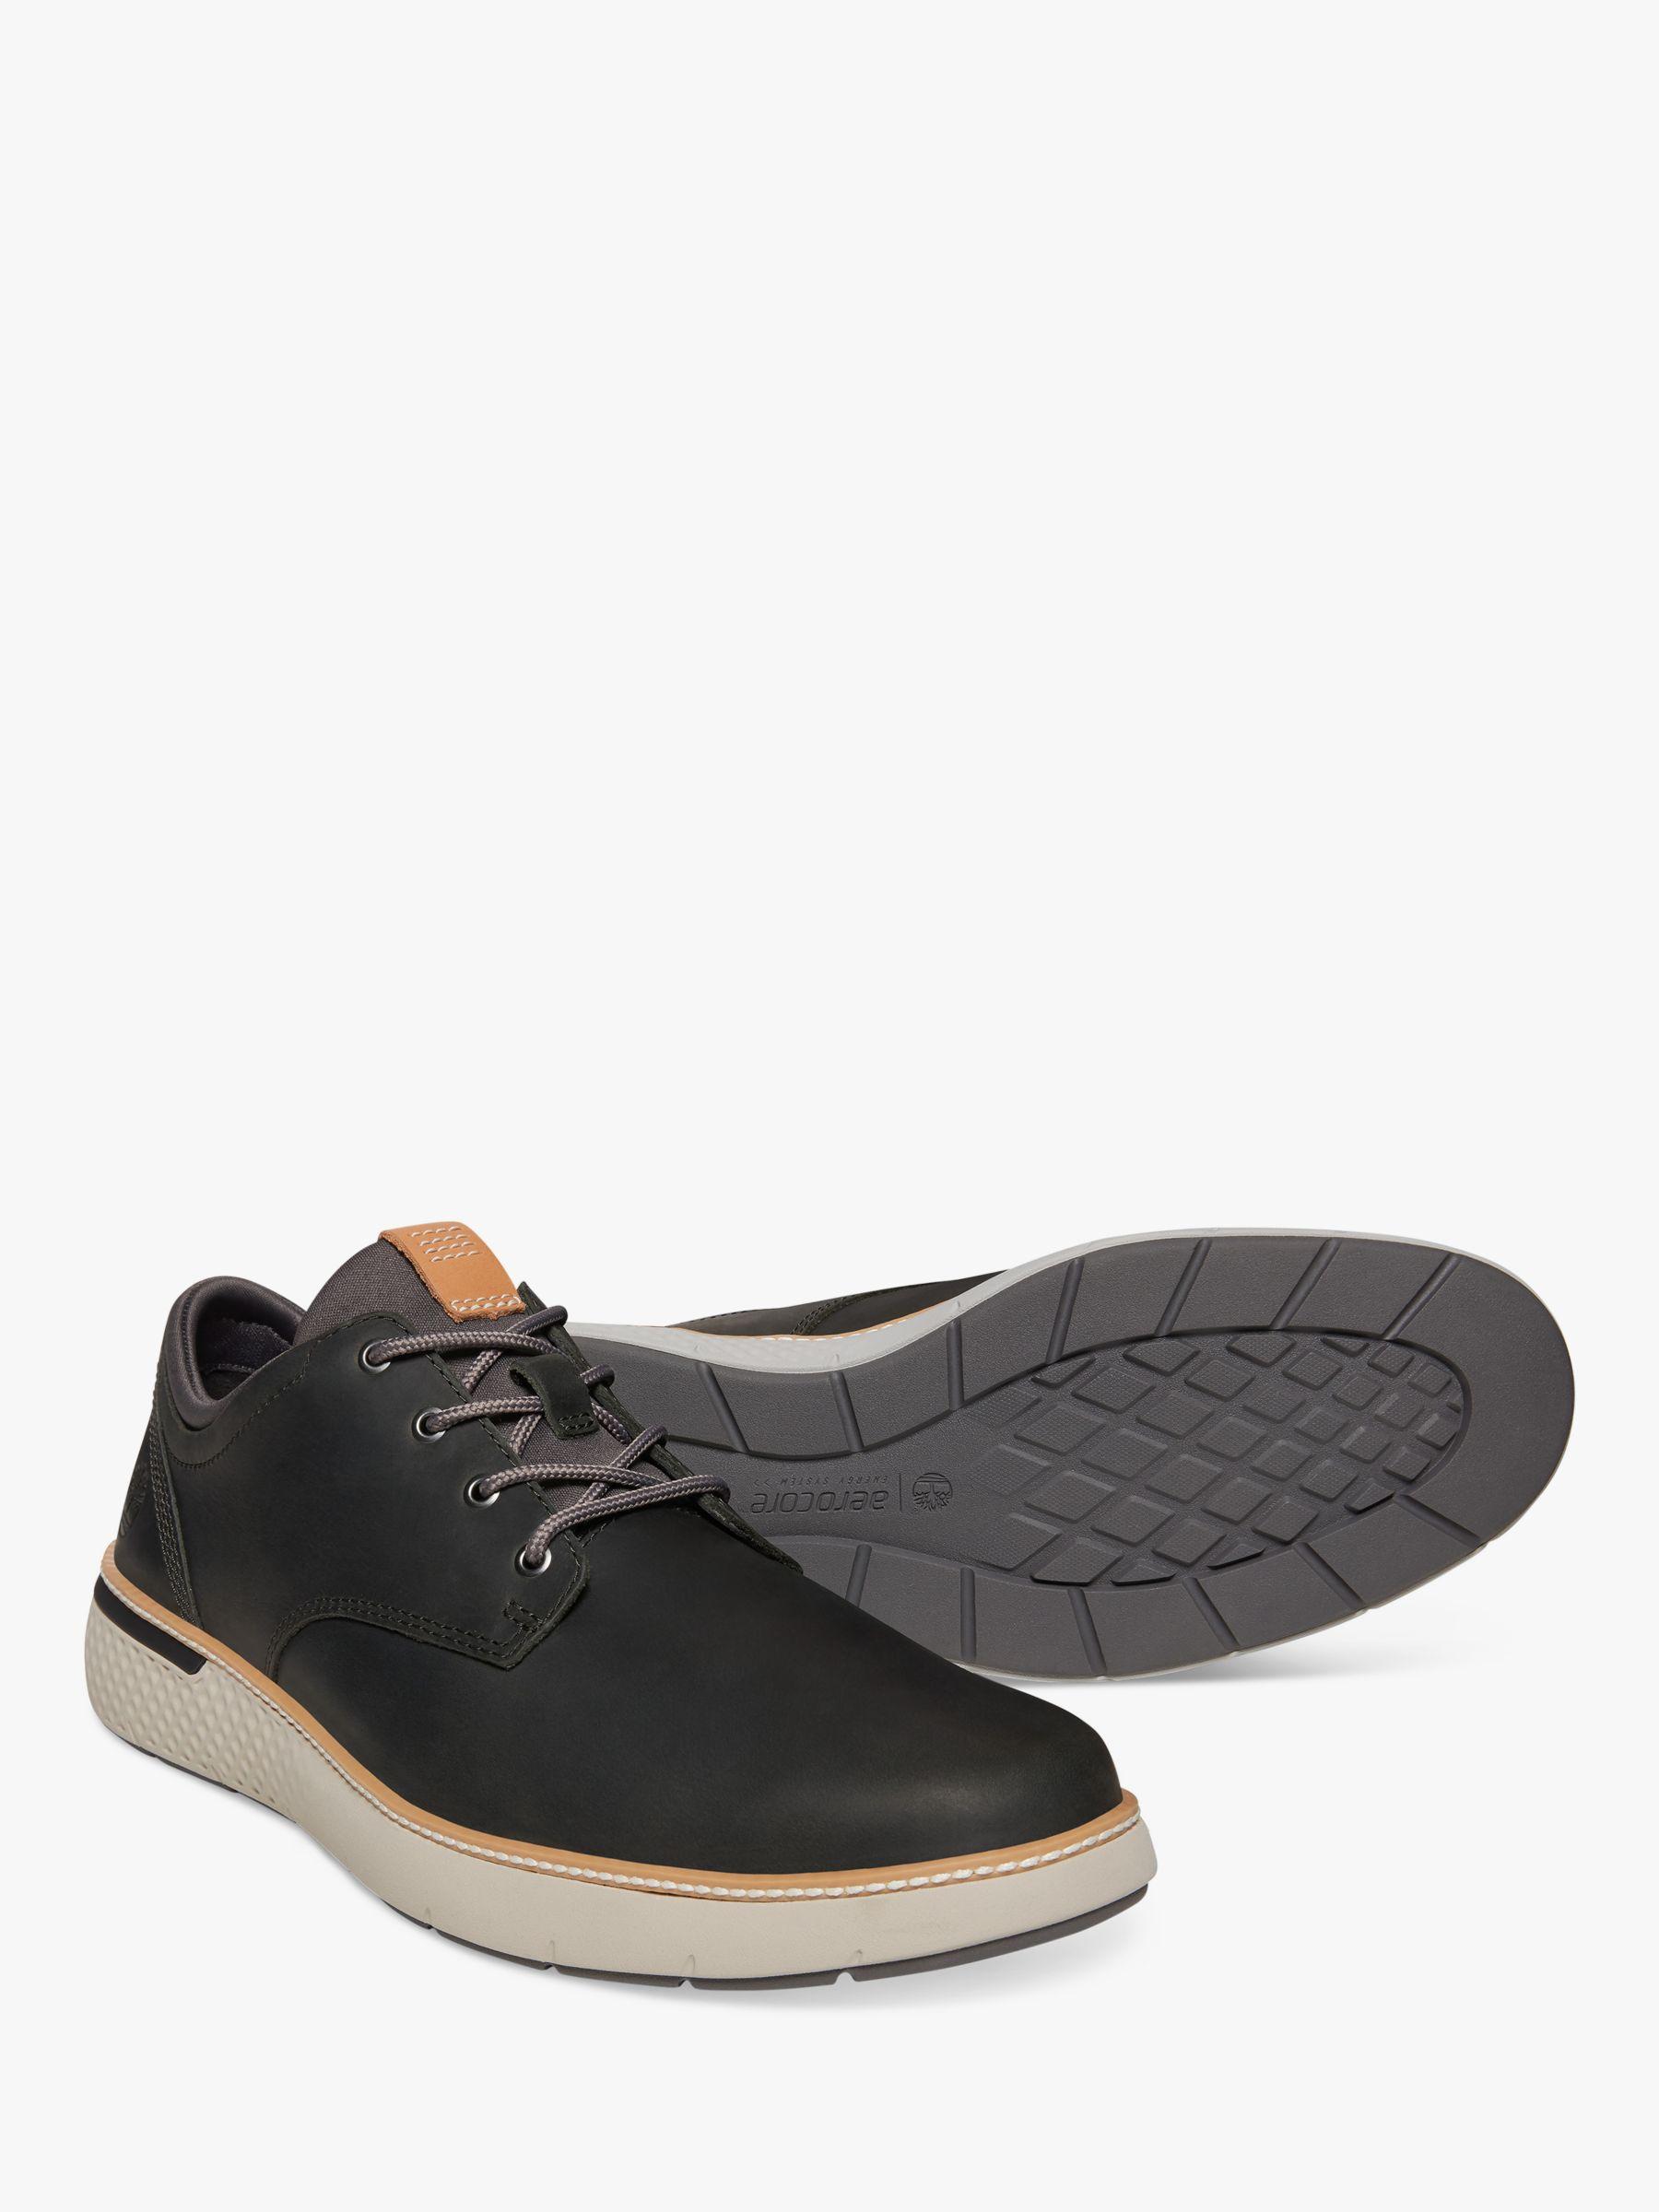 Timberland Leather Cross Mark Oxford Shoes for Men - Lyst